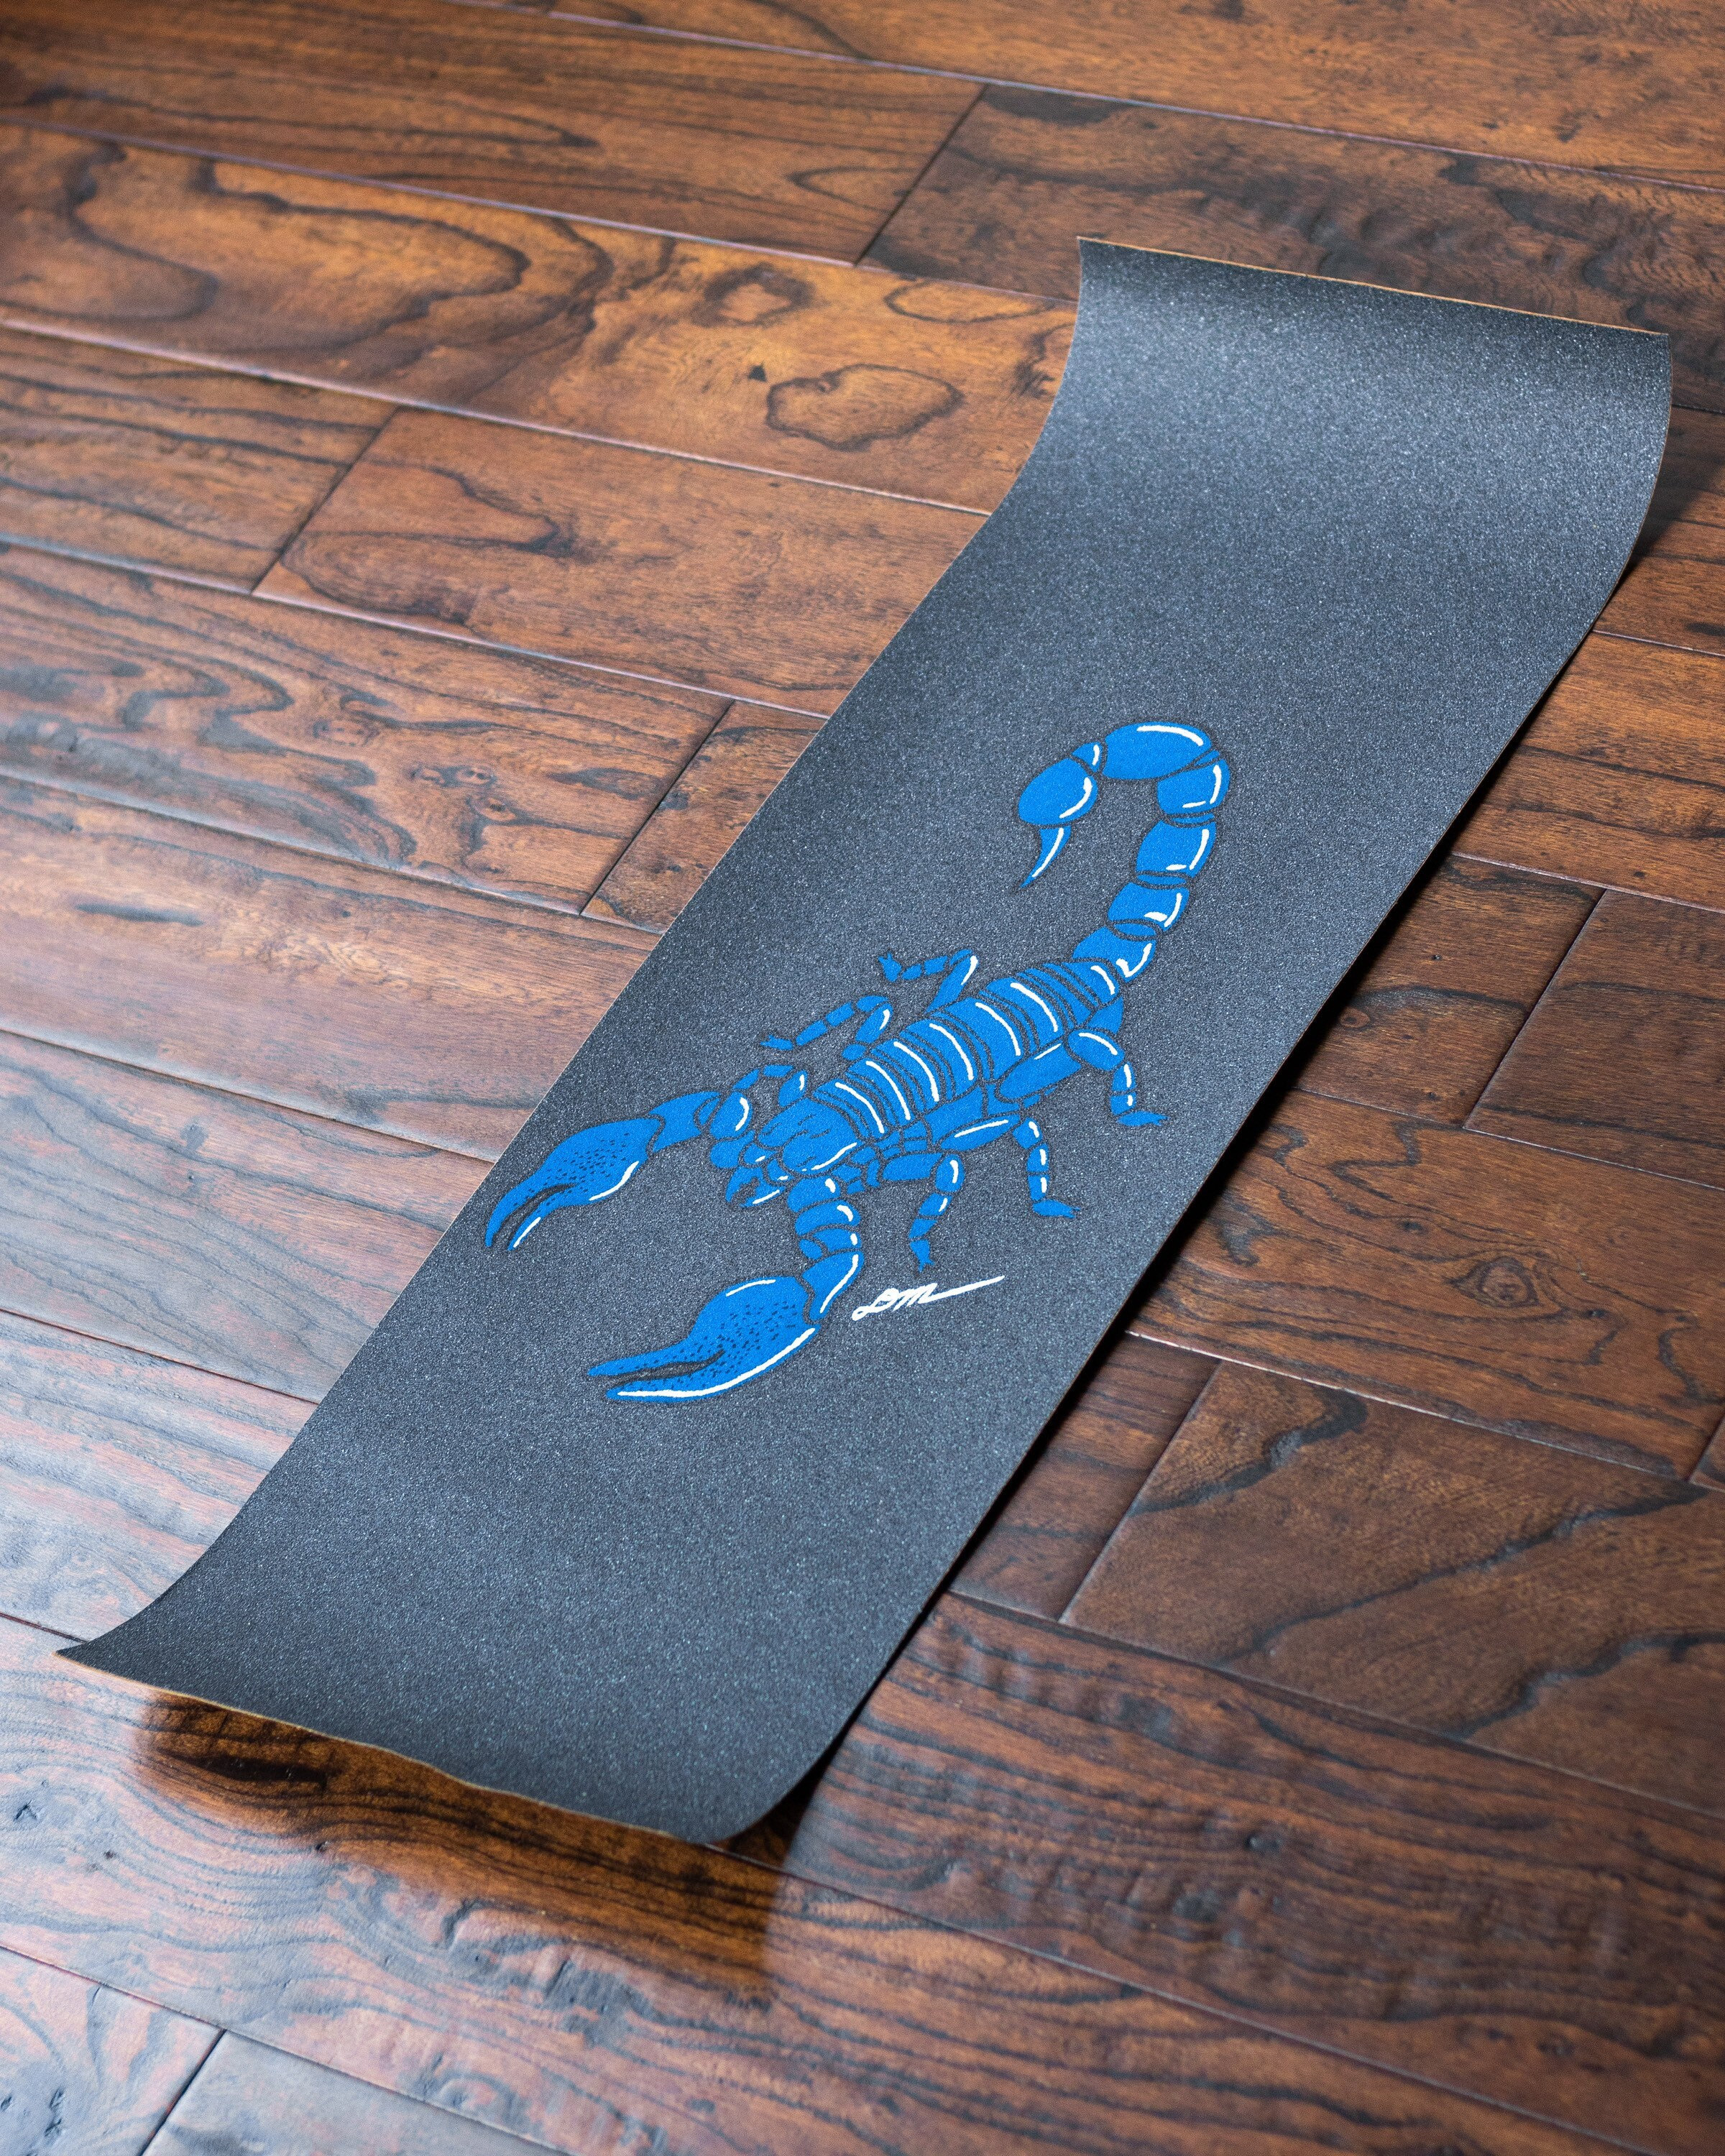 How to Customize Your Skateboard Grip Tape